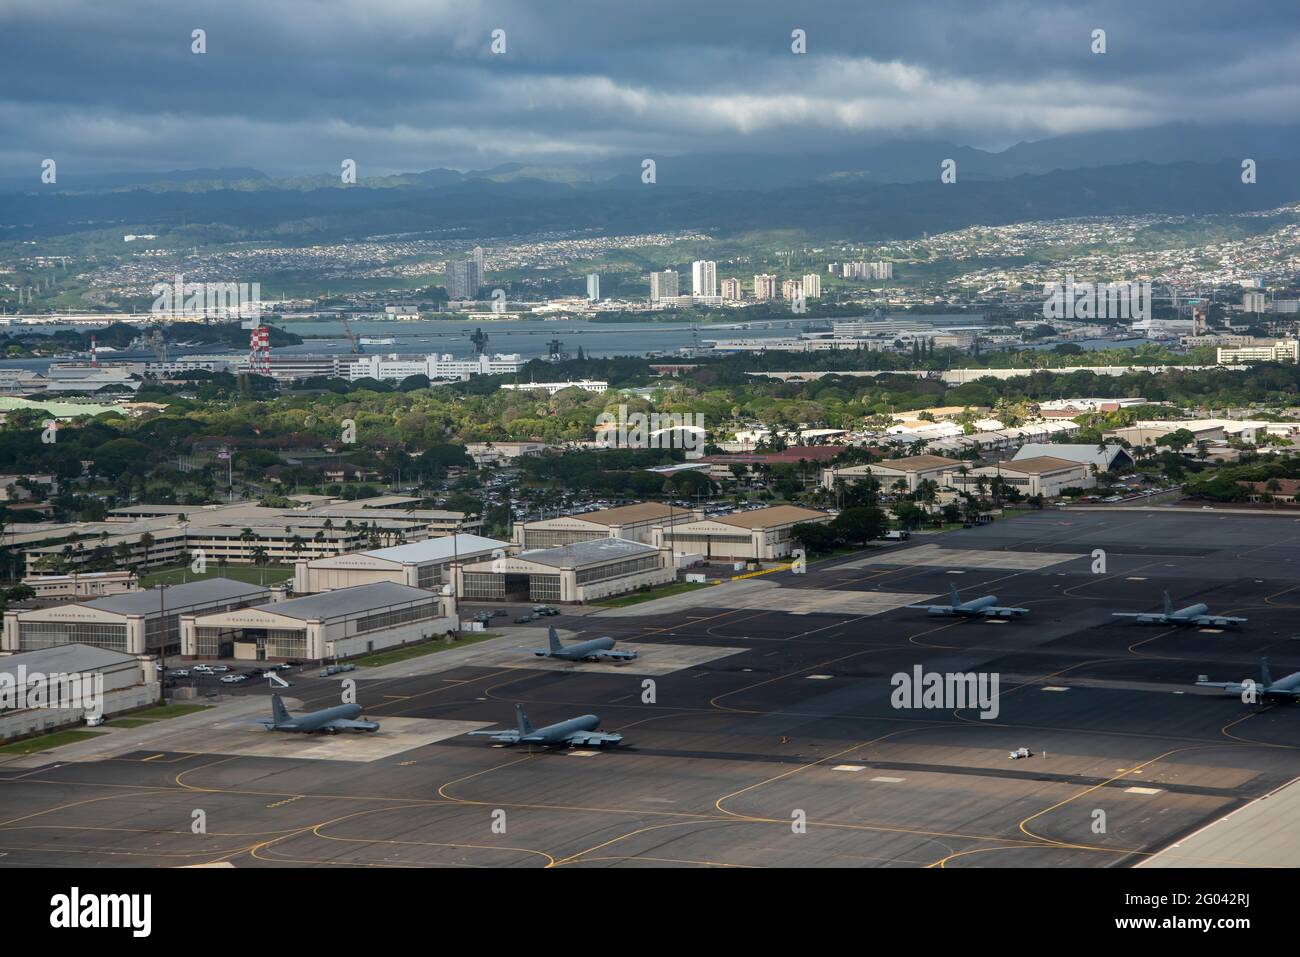 Aerial view of Honolulu Hawaii showing the Hickam Air Force Base which is home to the Pacific Command, PACAF, 15th Wing and the Hawaii Air National Gu Stock Photo